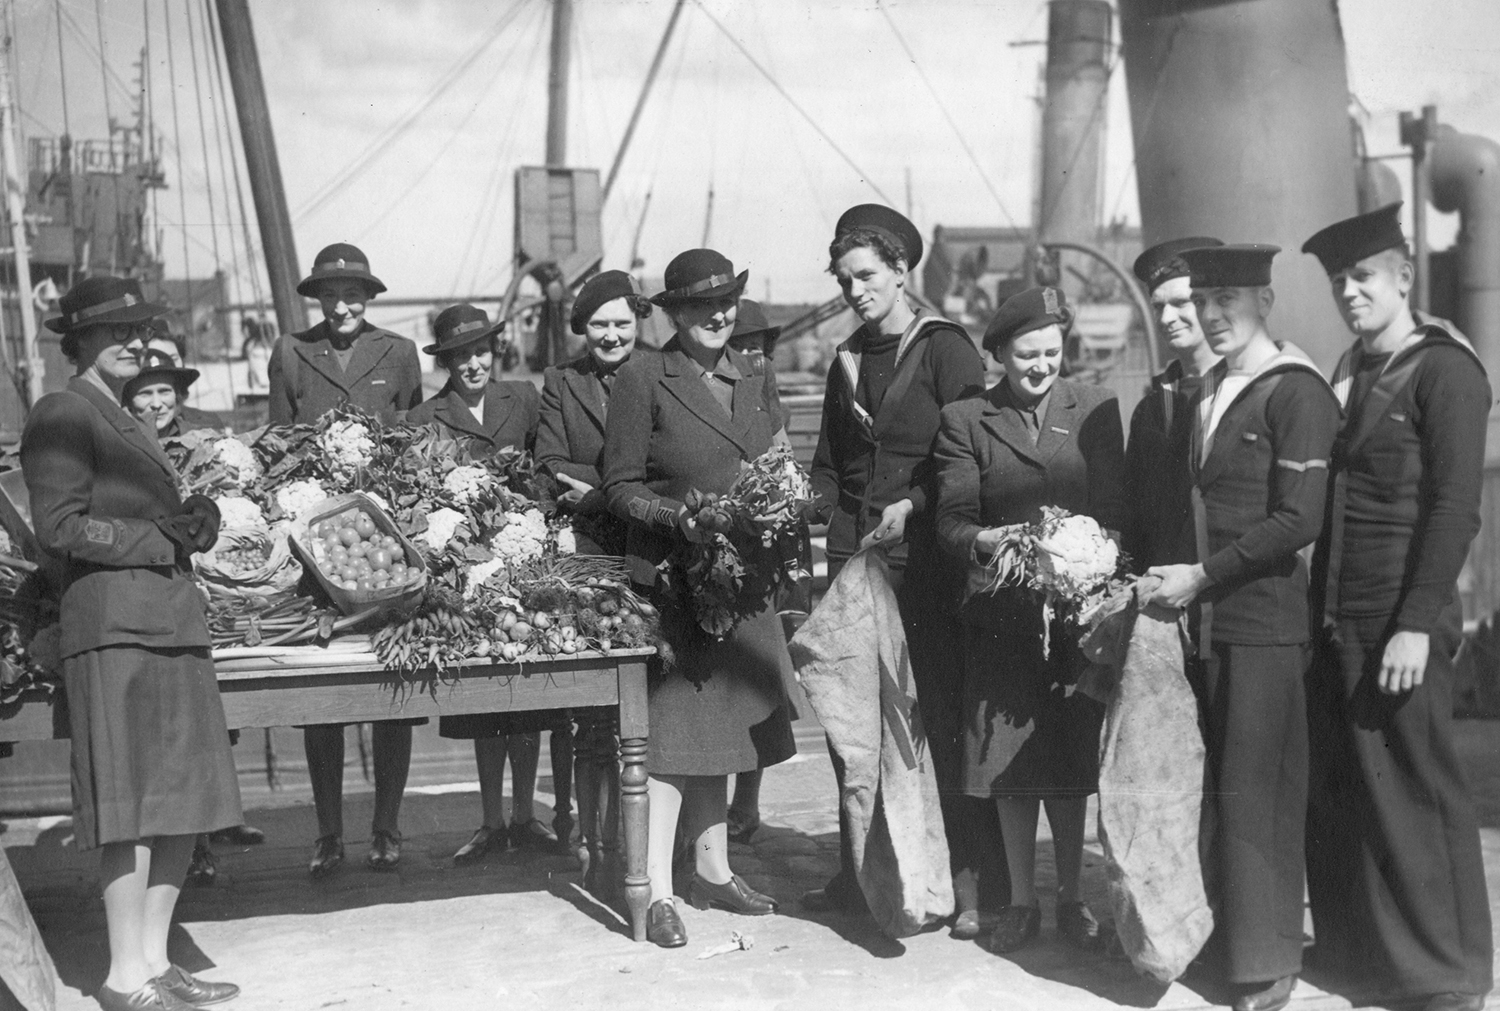 Lady Reading visiting services welfare vegetables for minesweepers, June 1944